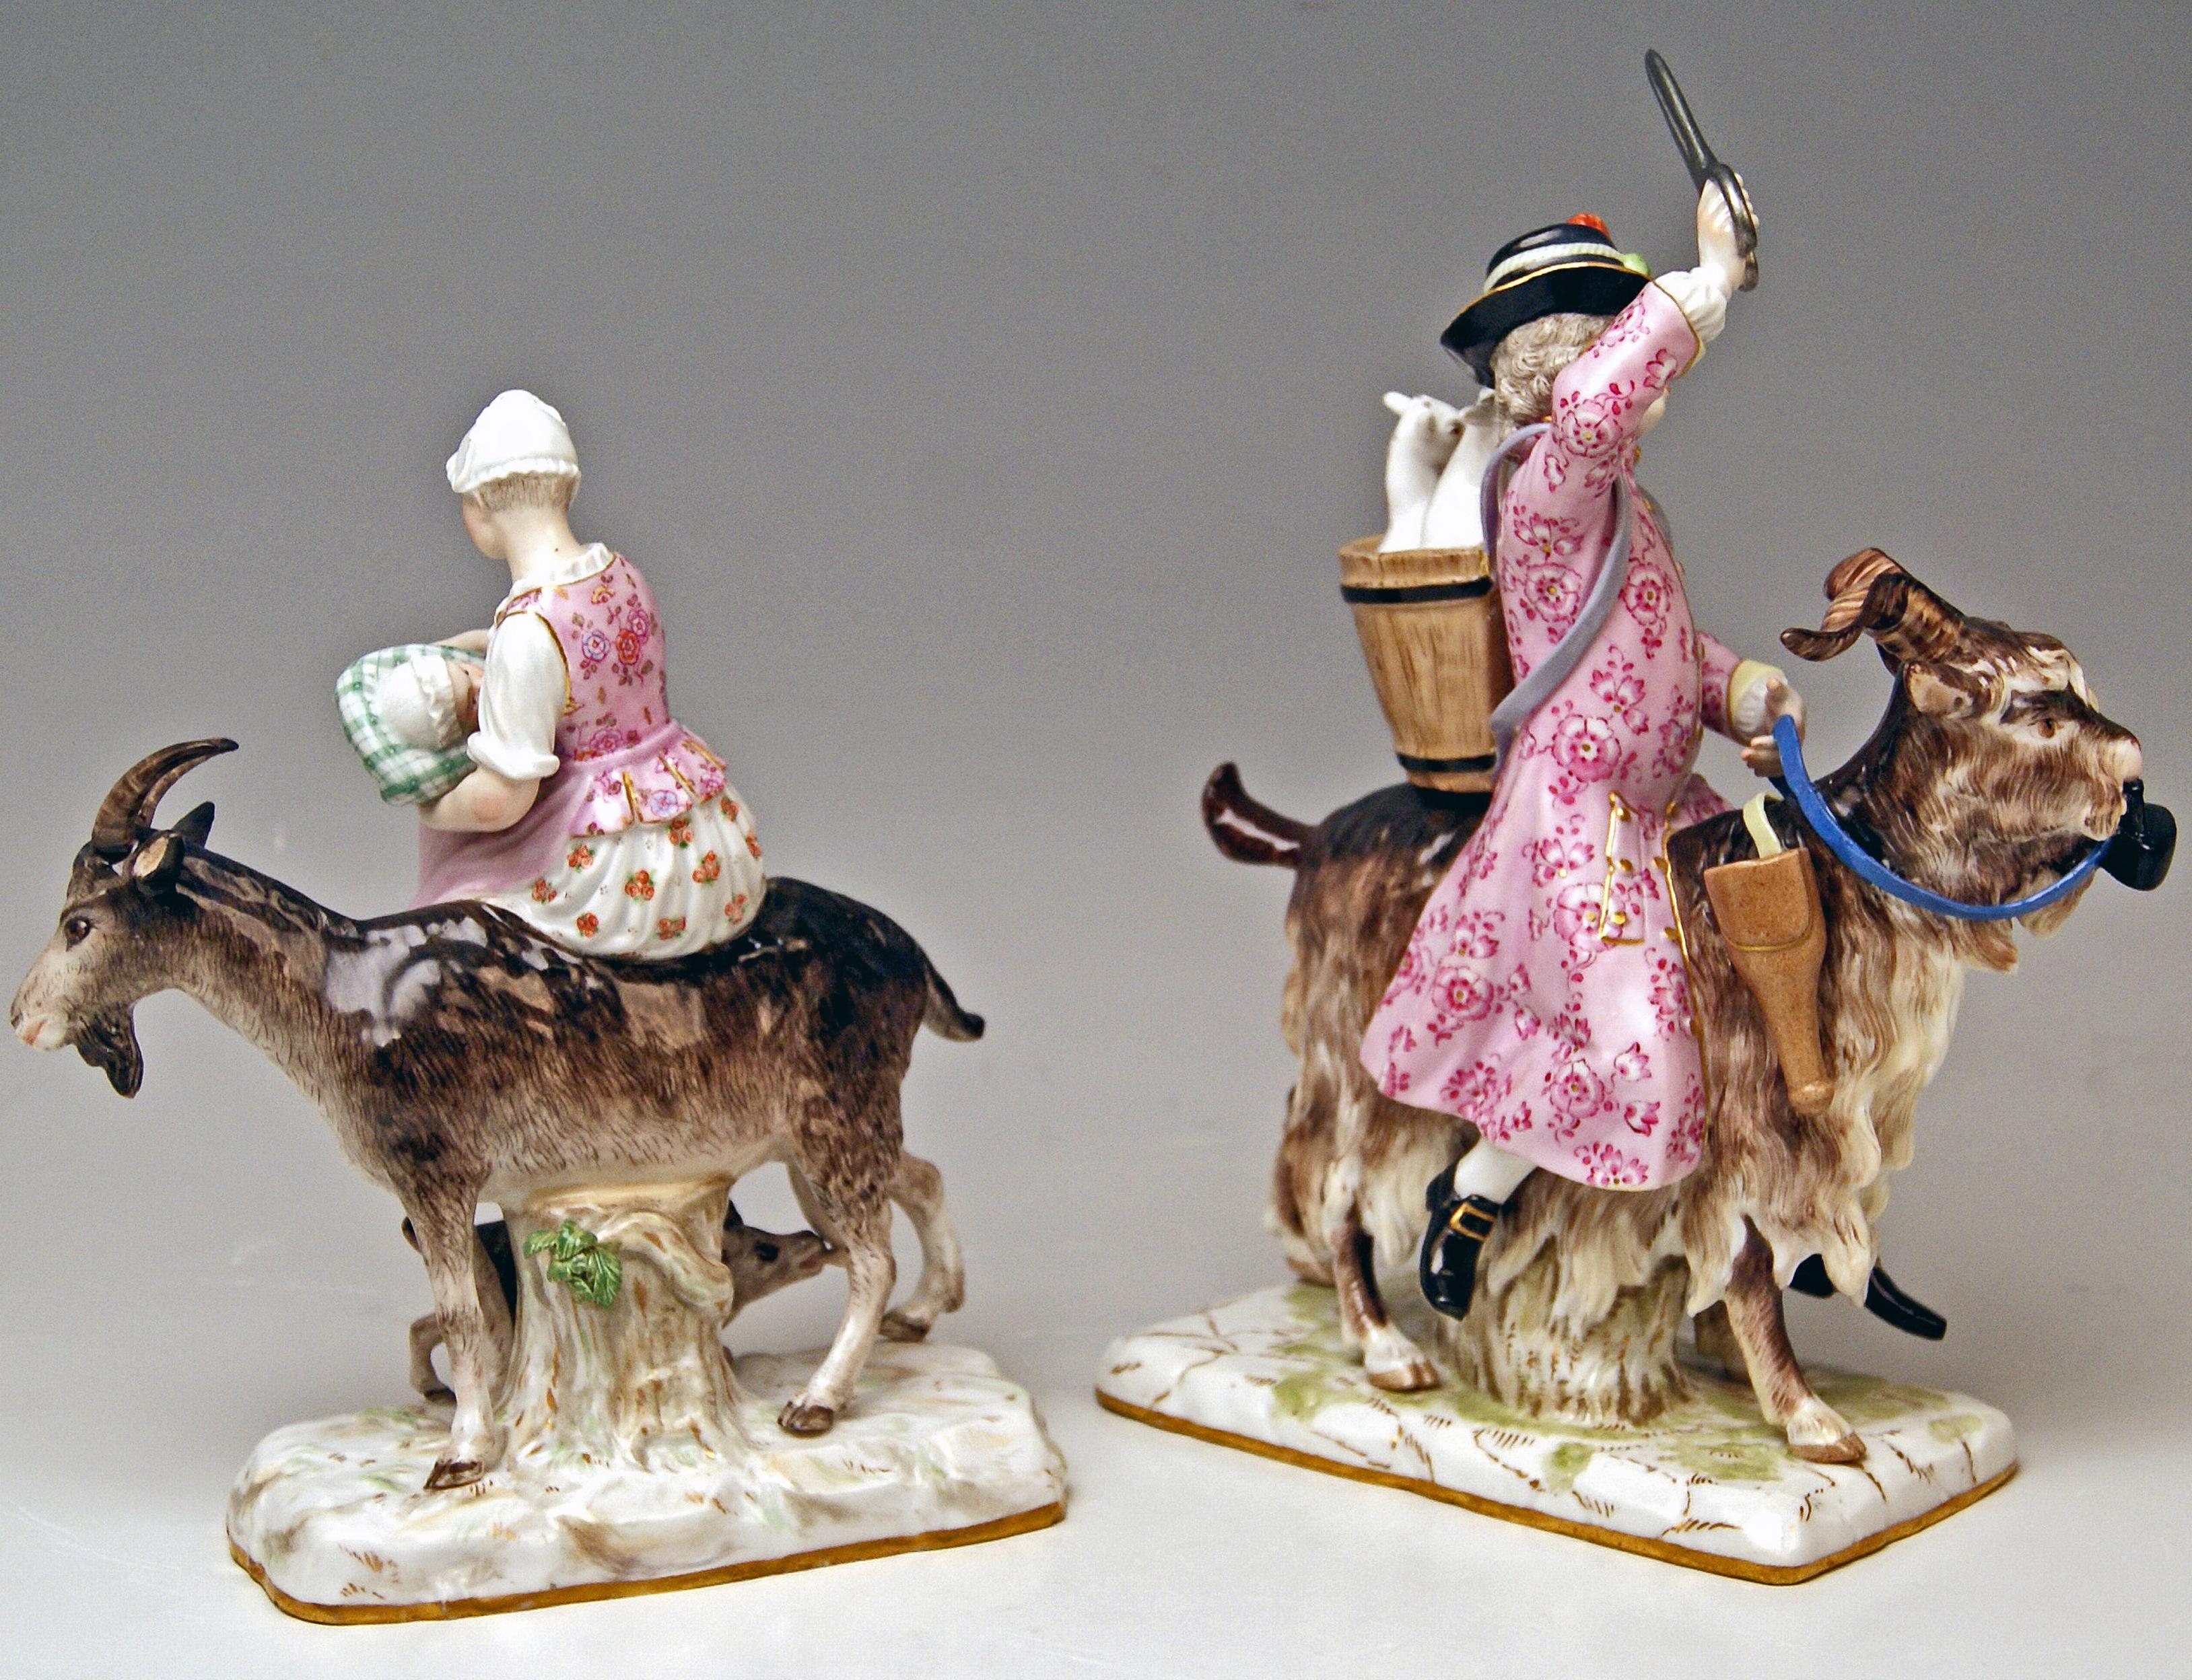 Meissen Stunning Pair of Figurines:  Tailor of Count Bruehl Riding on Goat & Wife of Tailor Riding on Goat 

Manufactory:  Meissen
Dating:    19th century / made circa 1860 - 70
Material:  white porcelain, glossy finish, finest painting 
Technique: